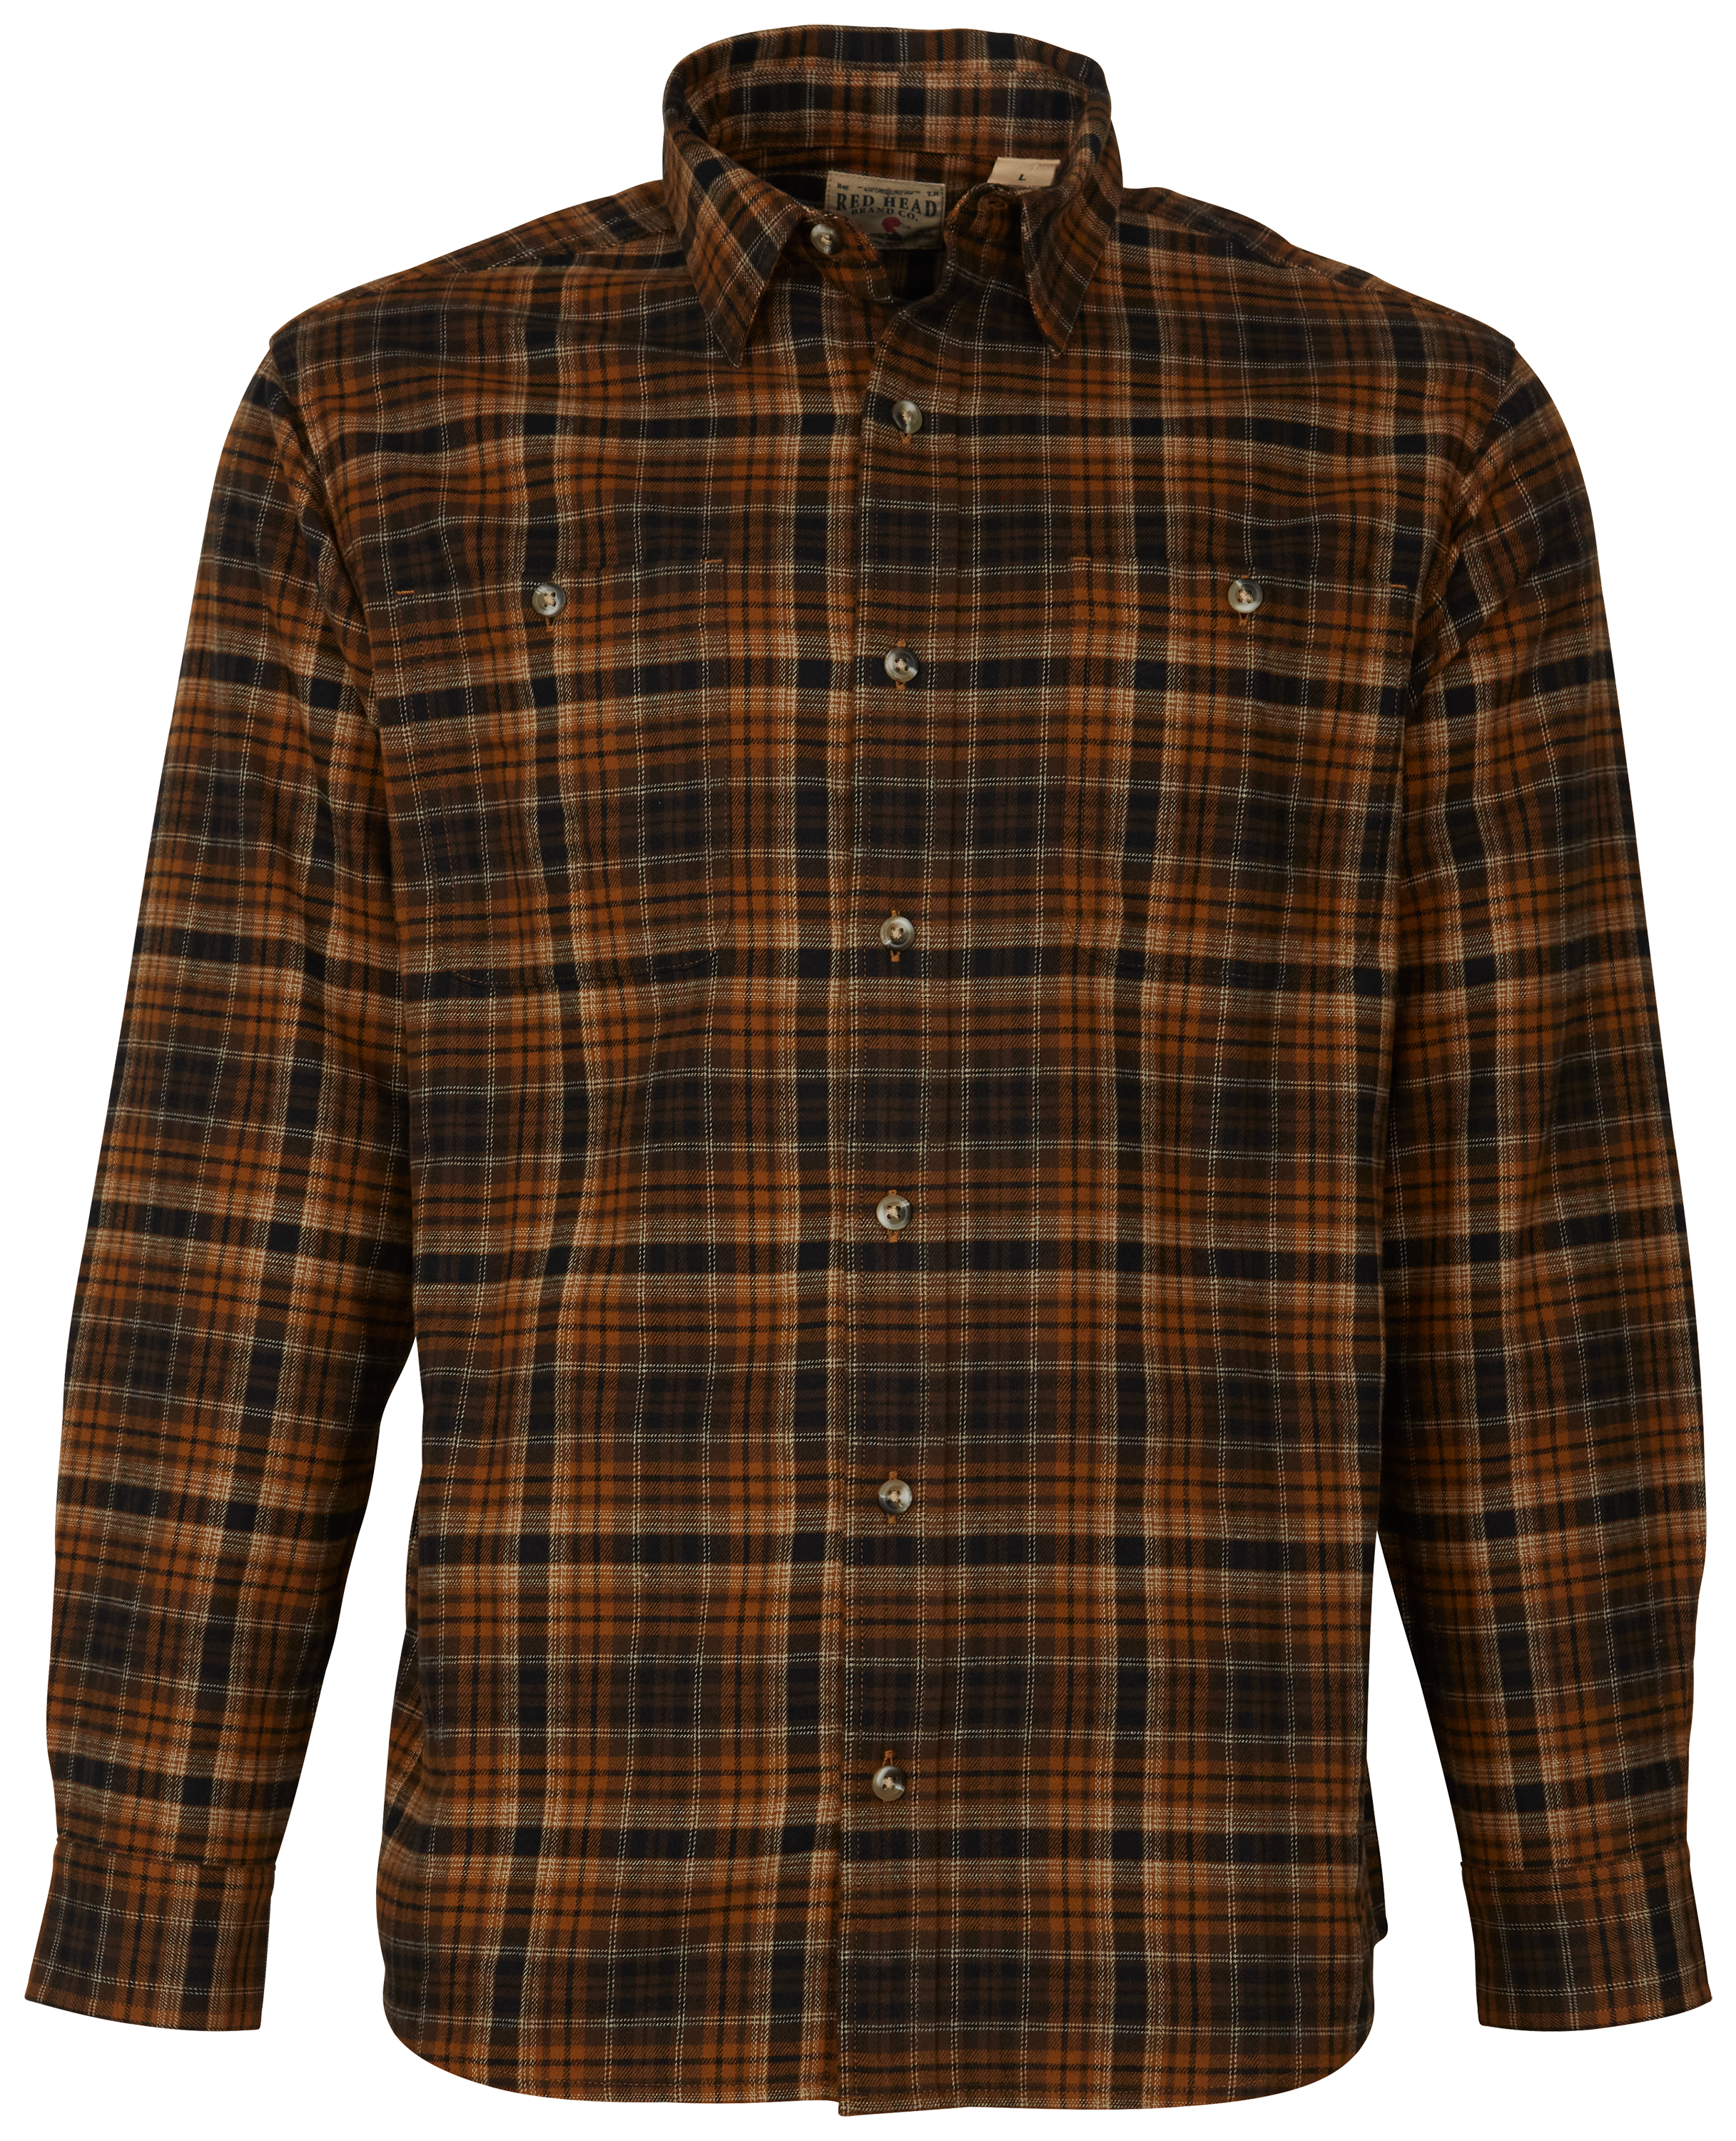 Redhead Ozark Mountain Flannel Long-Sleeve Button-Up Shirt for Men - Royal - L